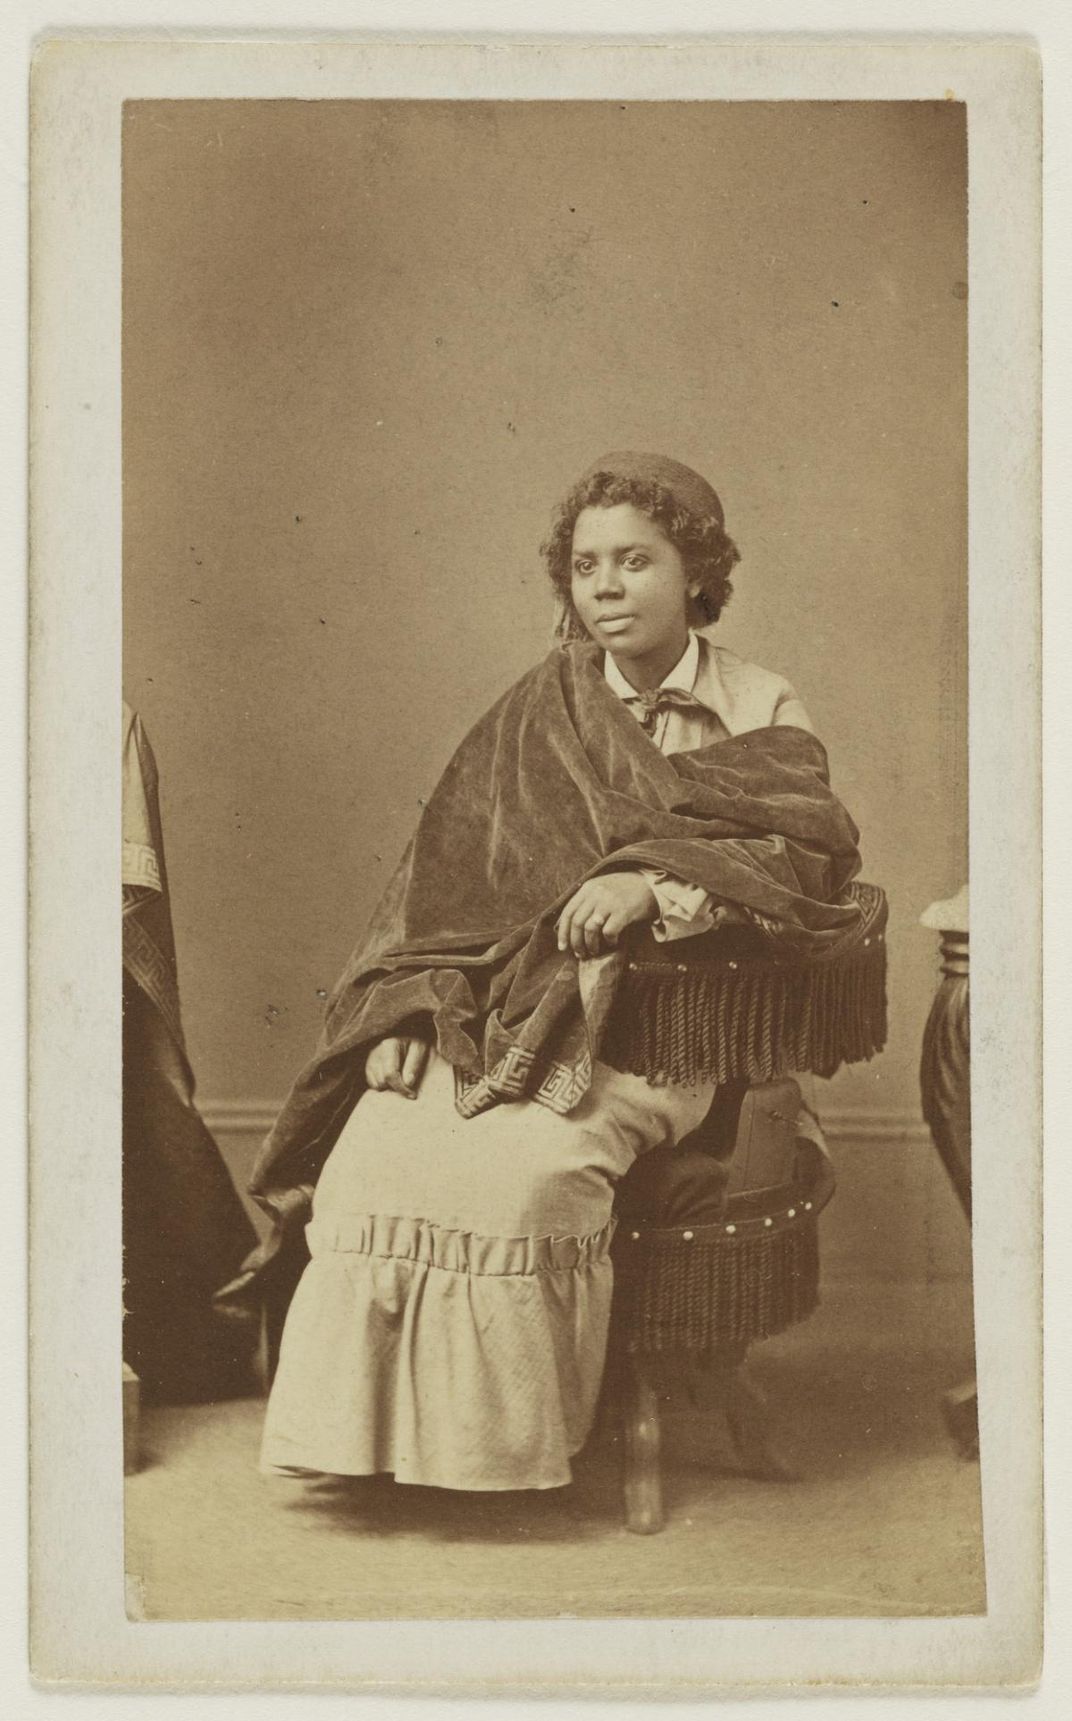 A sepia-toned image of a woman sitting in a chair, wrapped in a shawl.